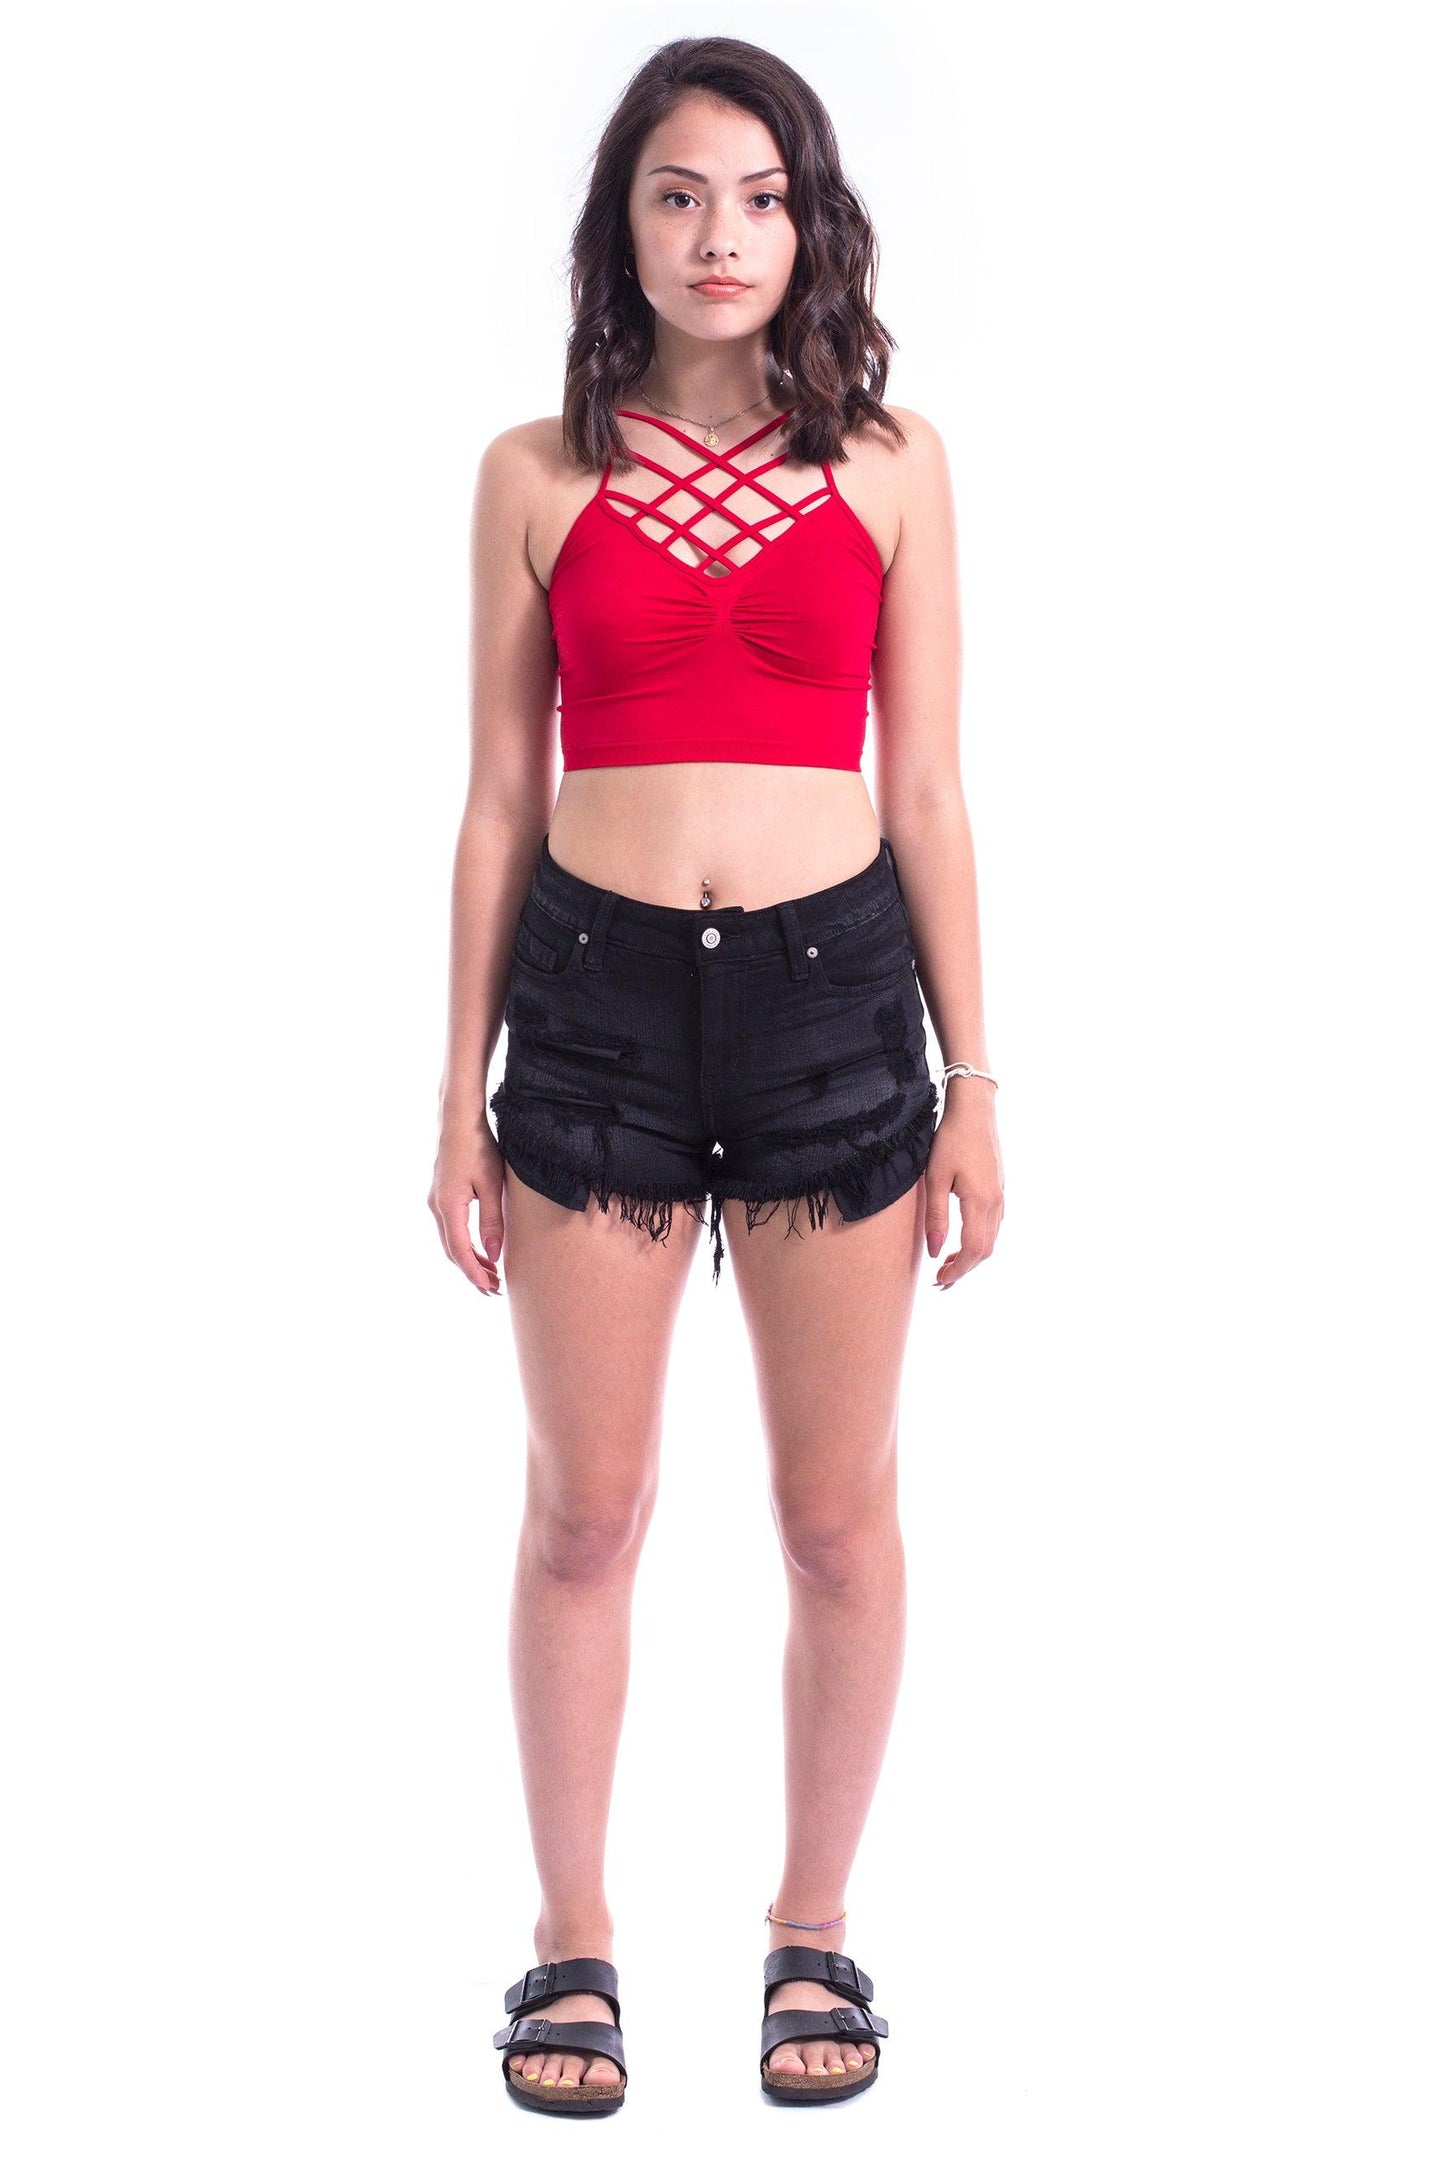 Tops Crop (10 Styles) - Photography and Web Design - Los Angeles, US based Shopify Experts Revo Designs